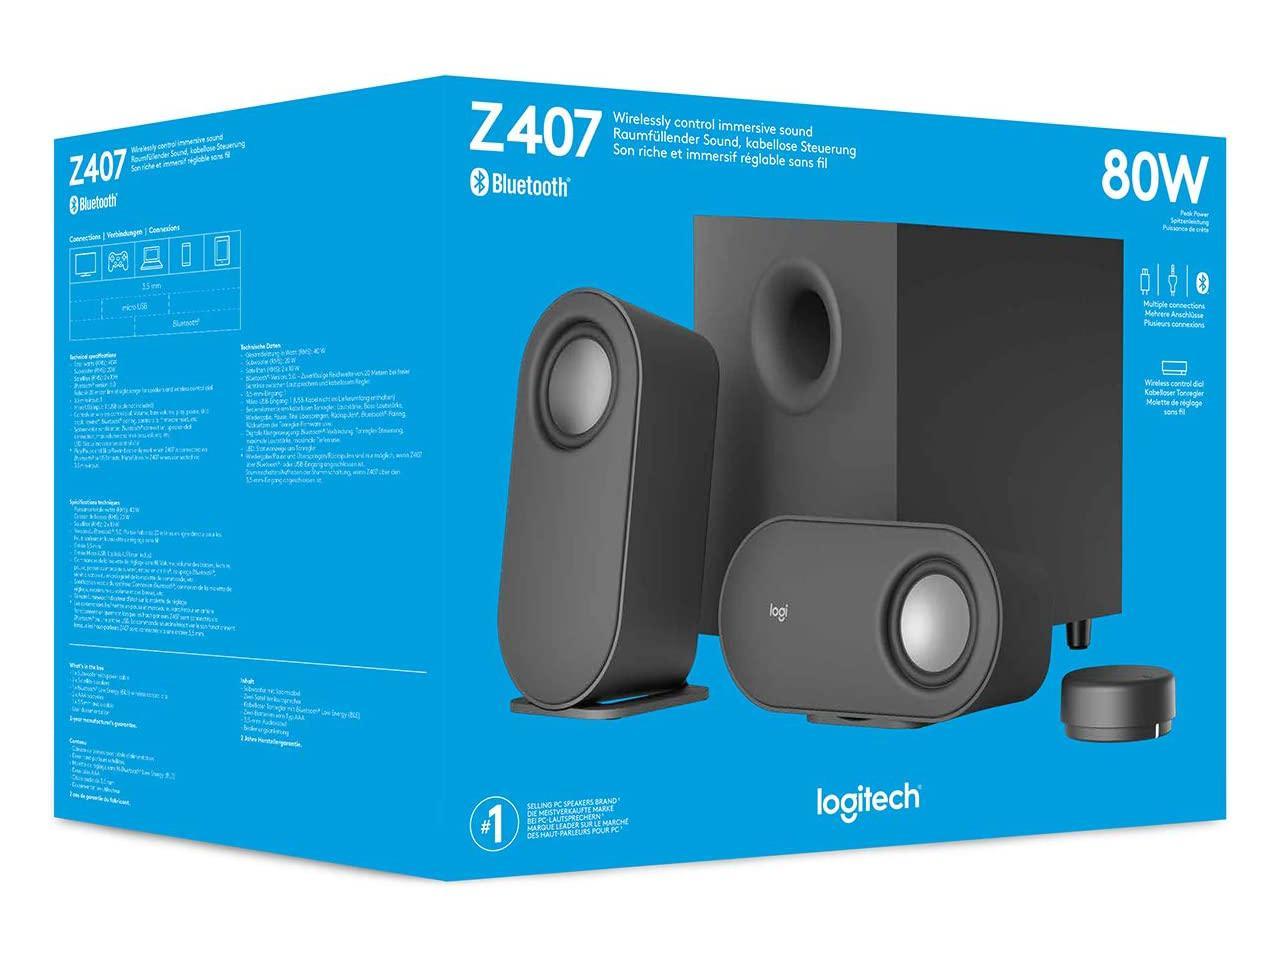 Logitech Z407 Bluetooth Computer Speakers with Subwoofer and Wireless Control, Immersive Sound, Premium Audio with Multiple USB -